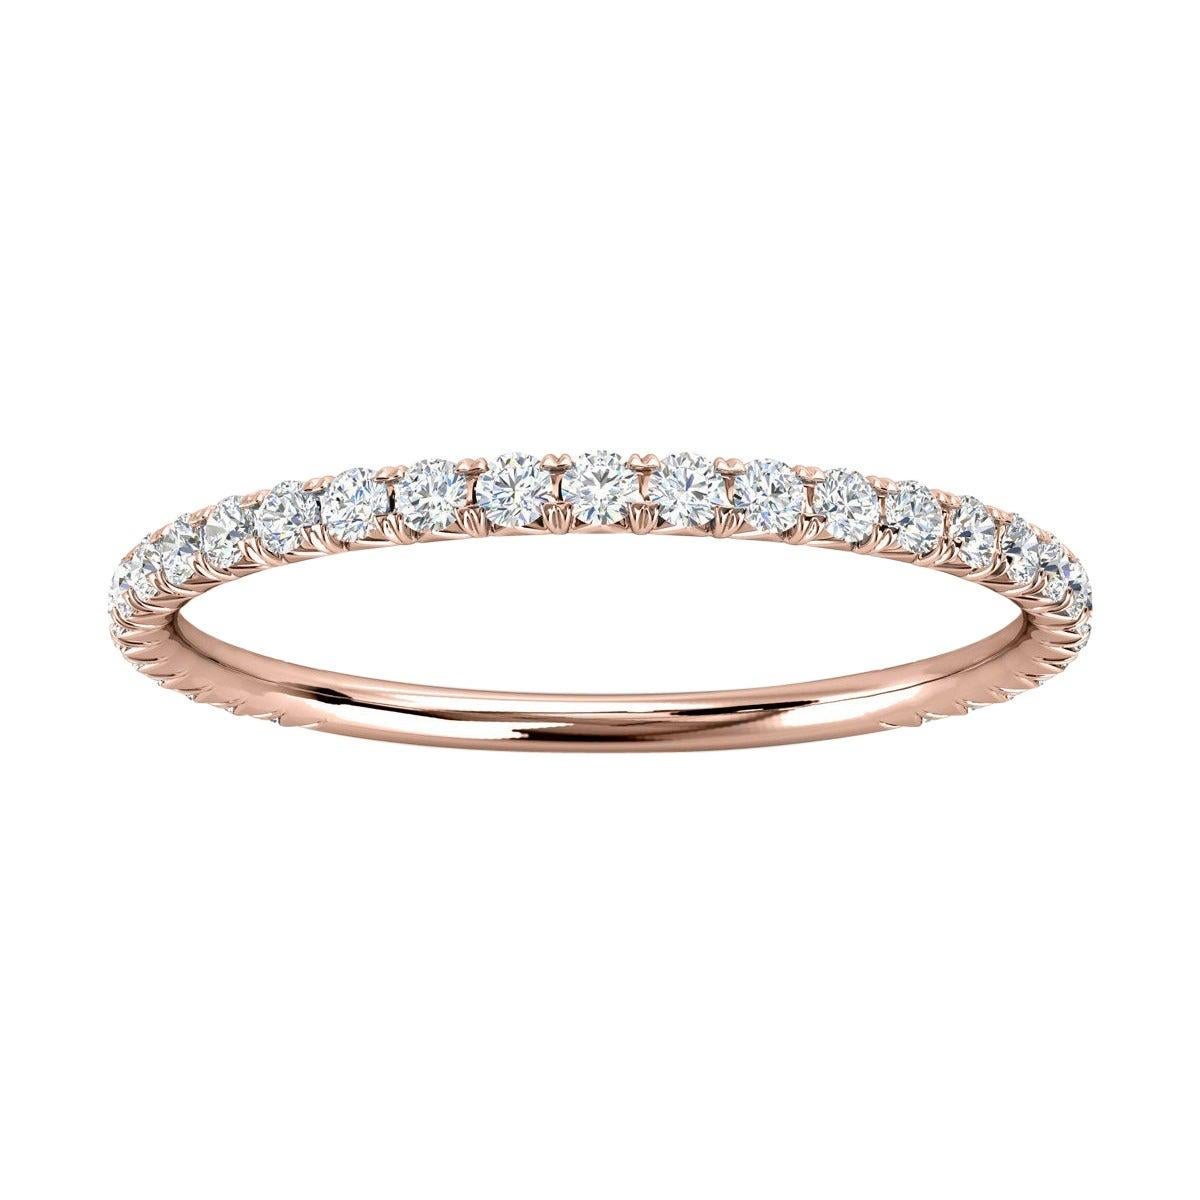 For Sale:  14k Rose Gold Mini GIA French Pave Diamond Ring '1/4 ct. tw'